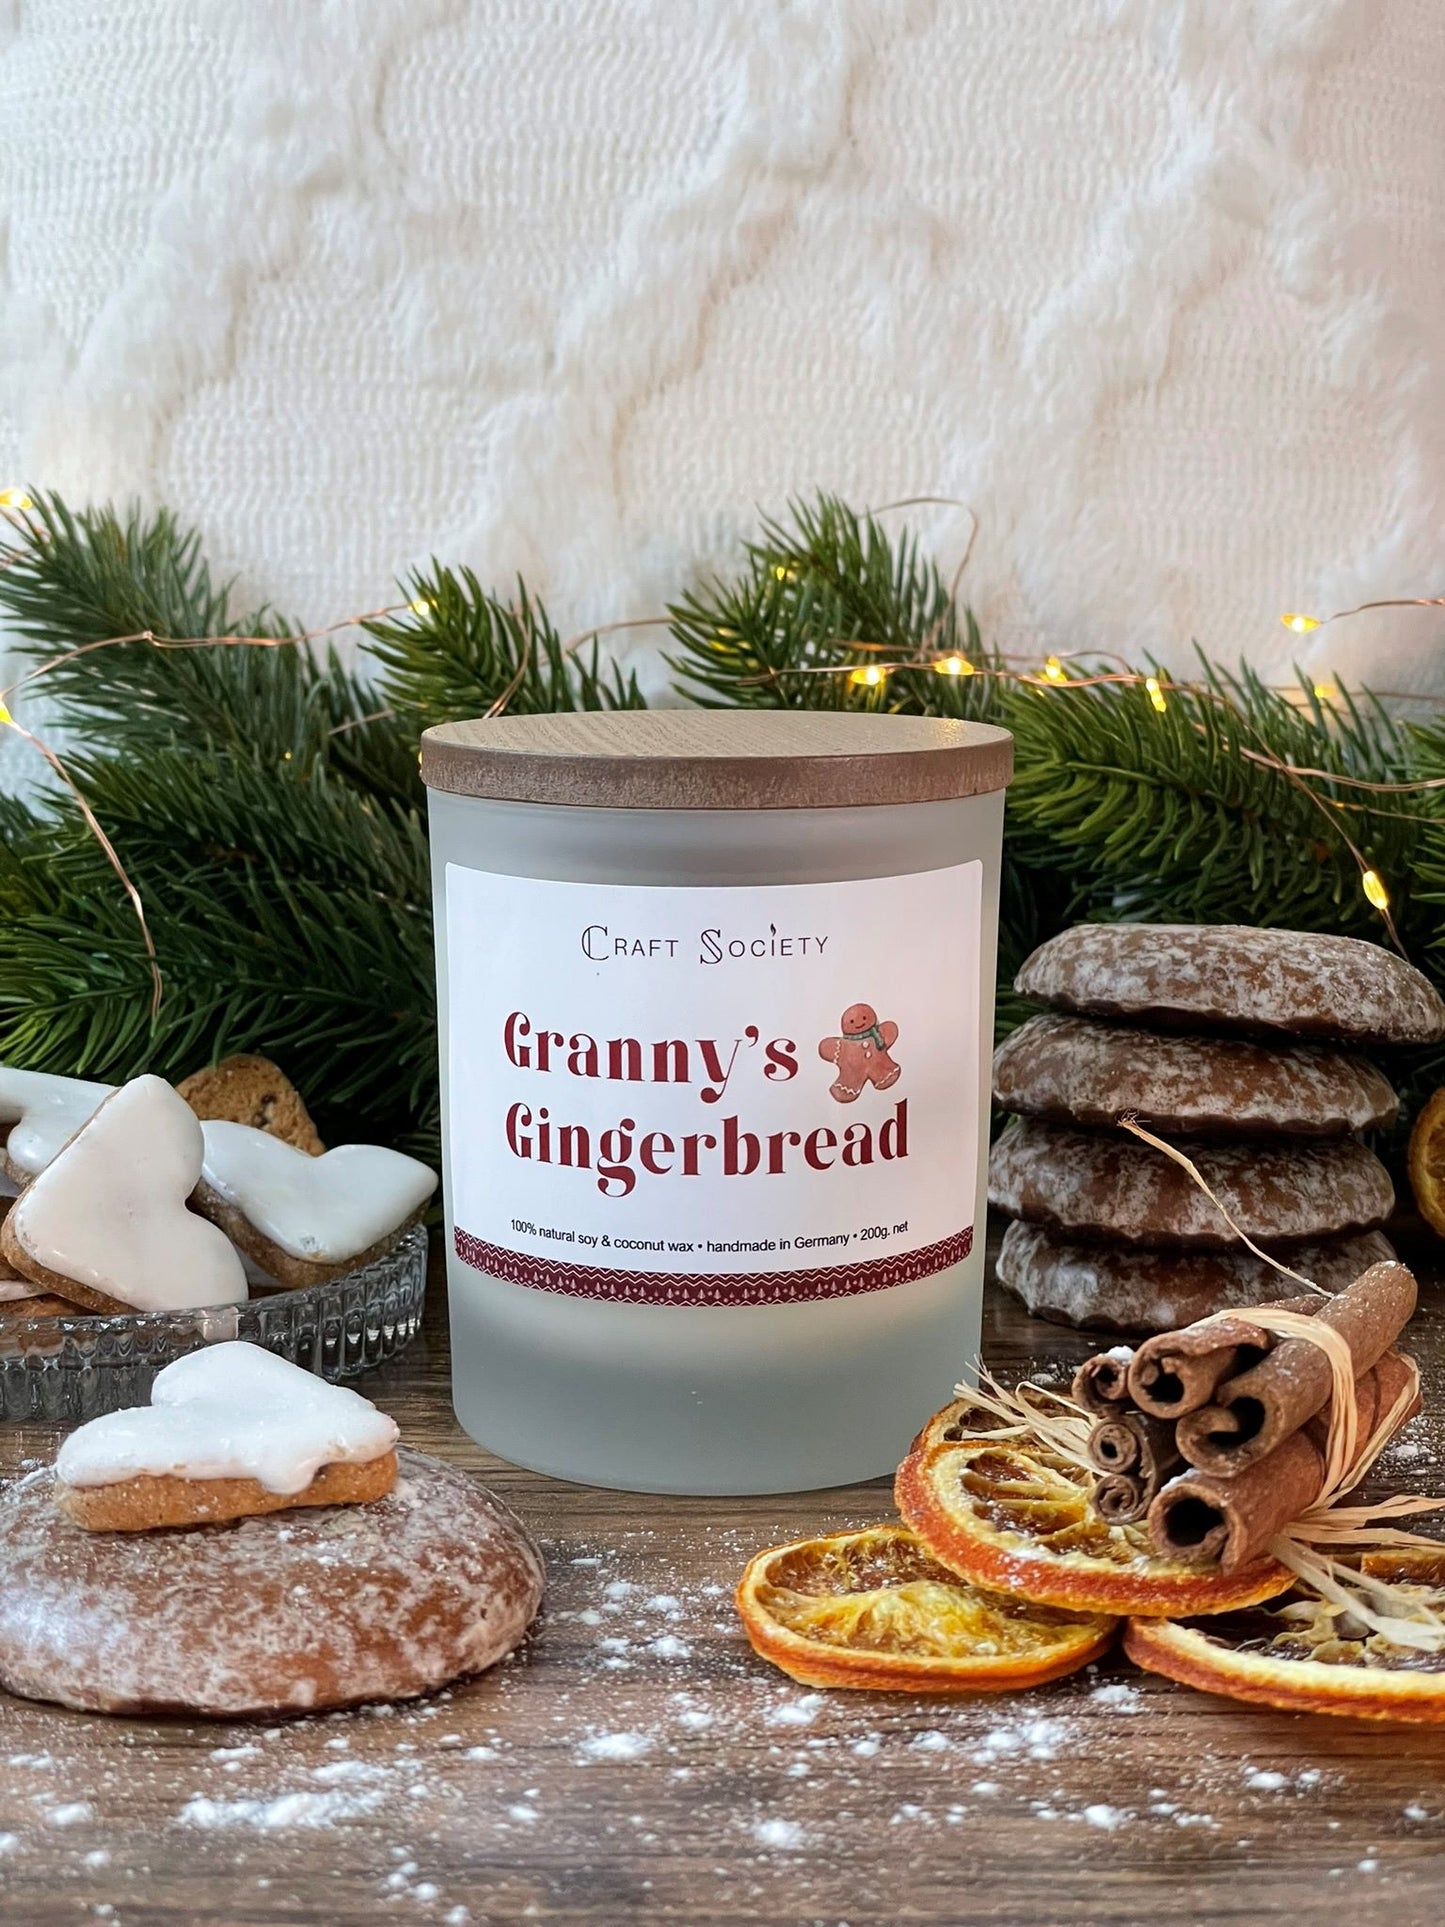 An unopened deluxe scented candle on a decorated background